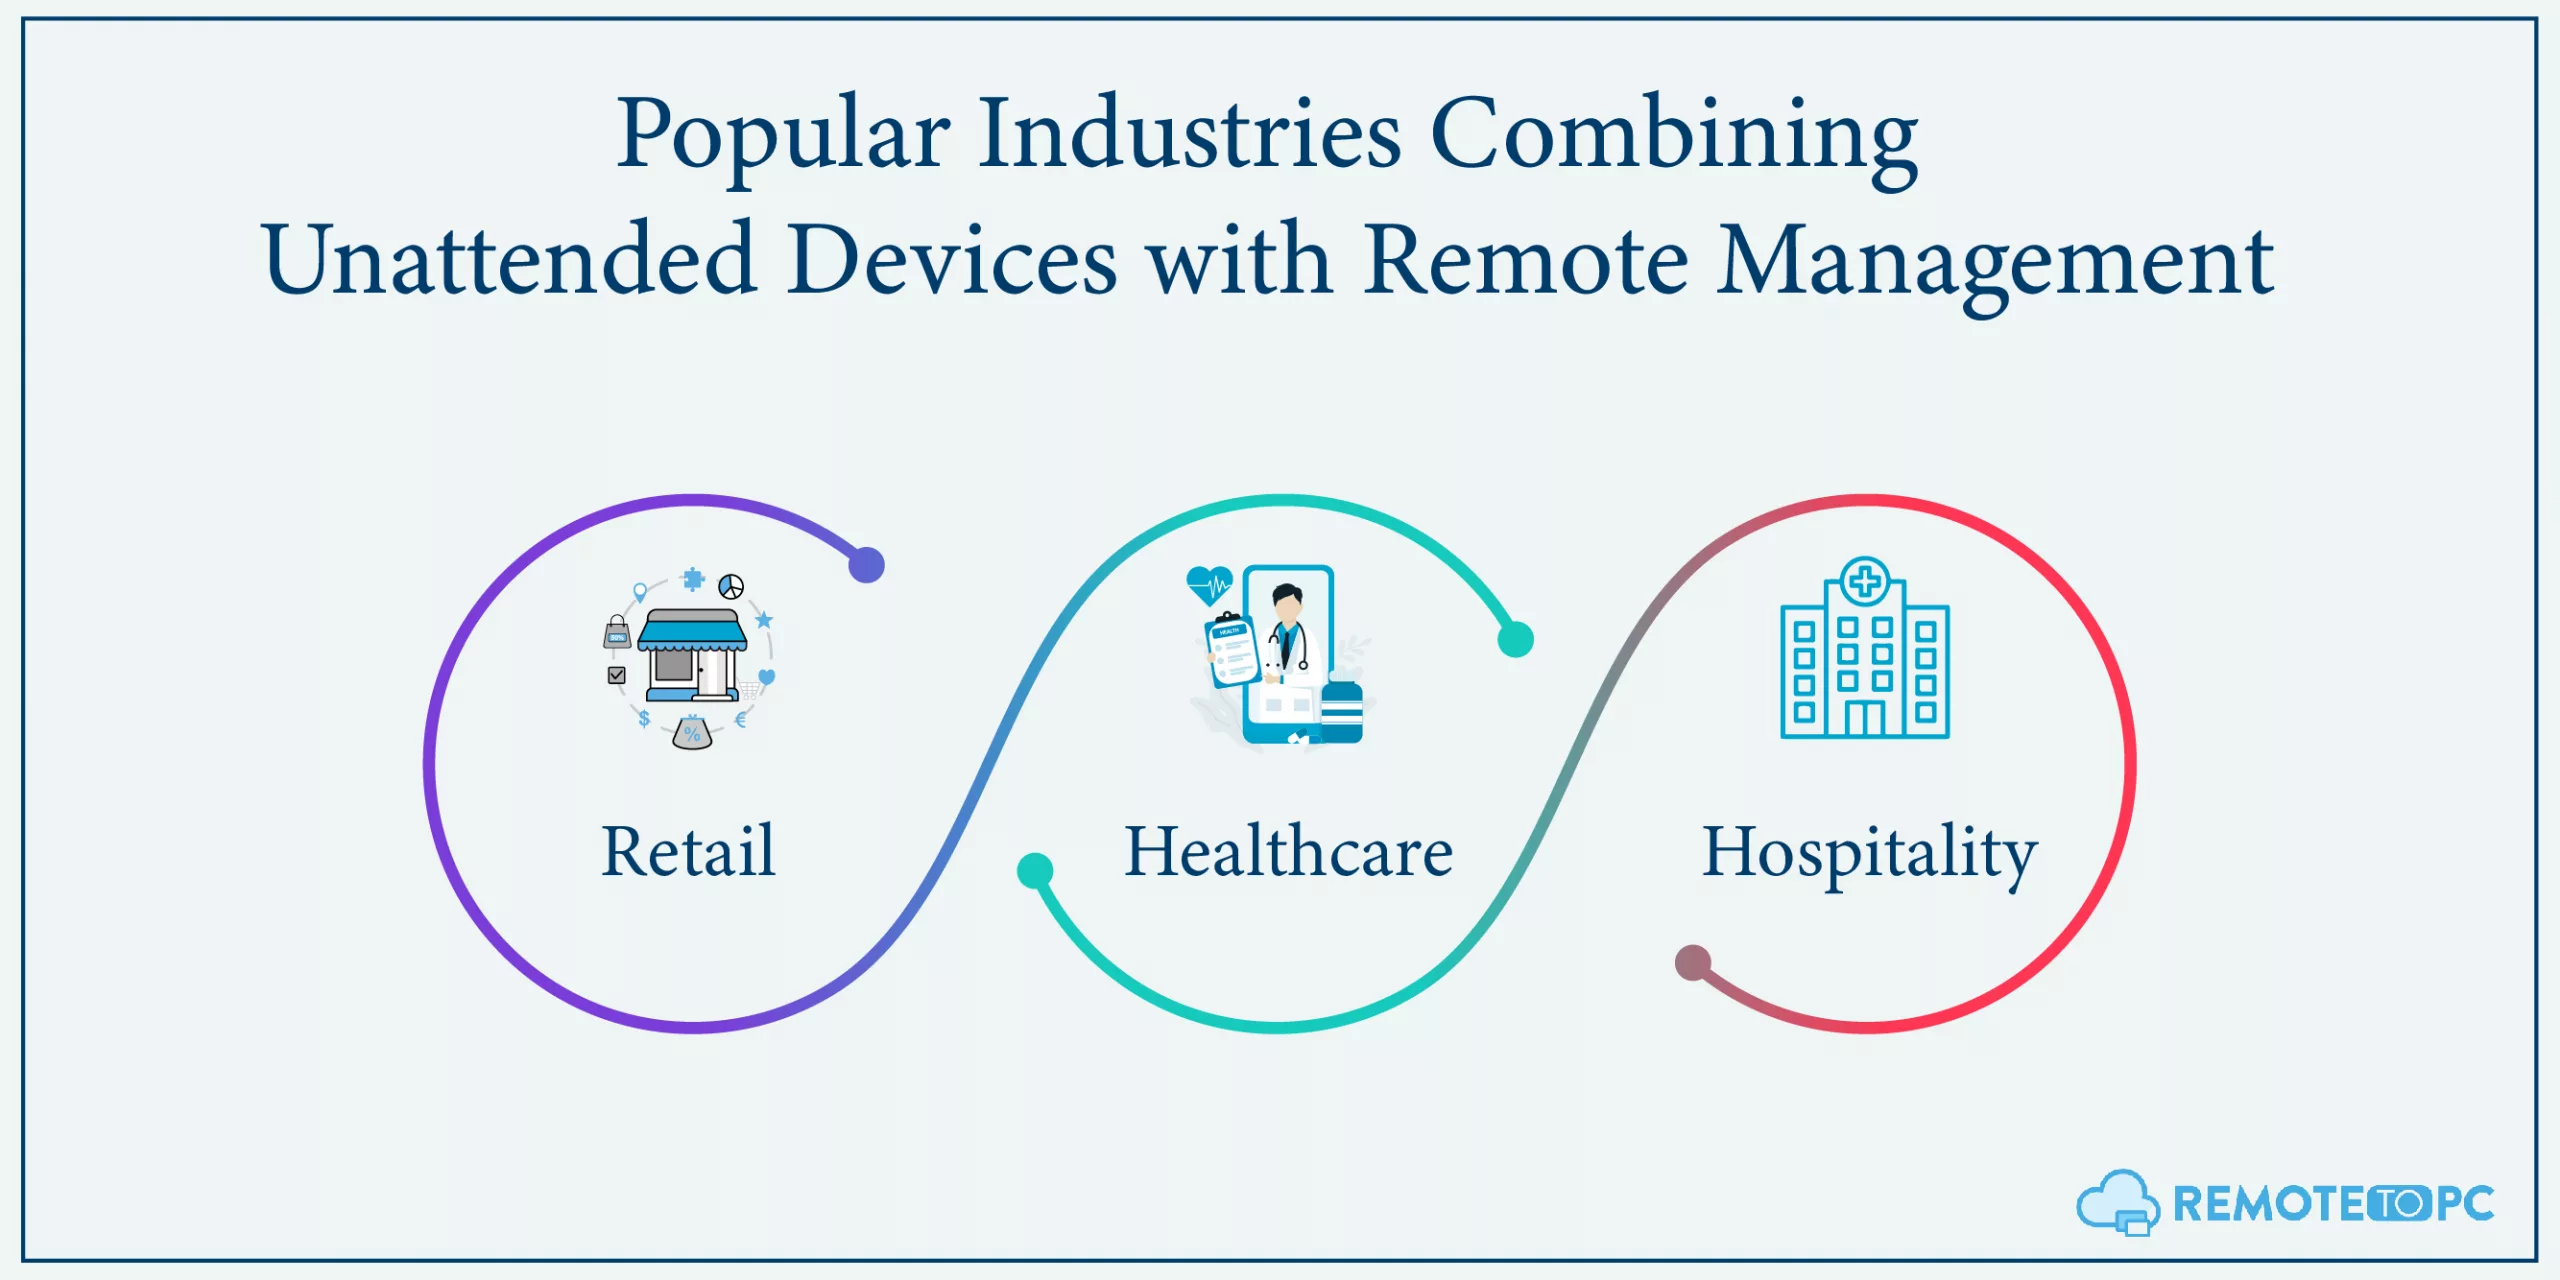 Industries using unattended devices and remote access